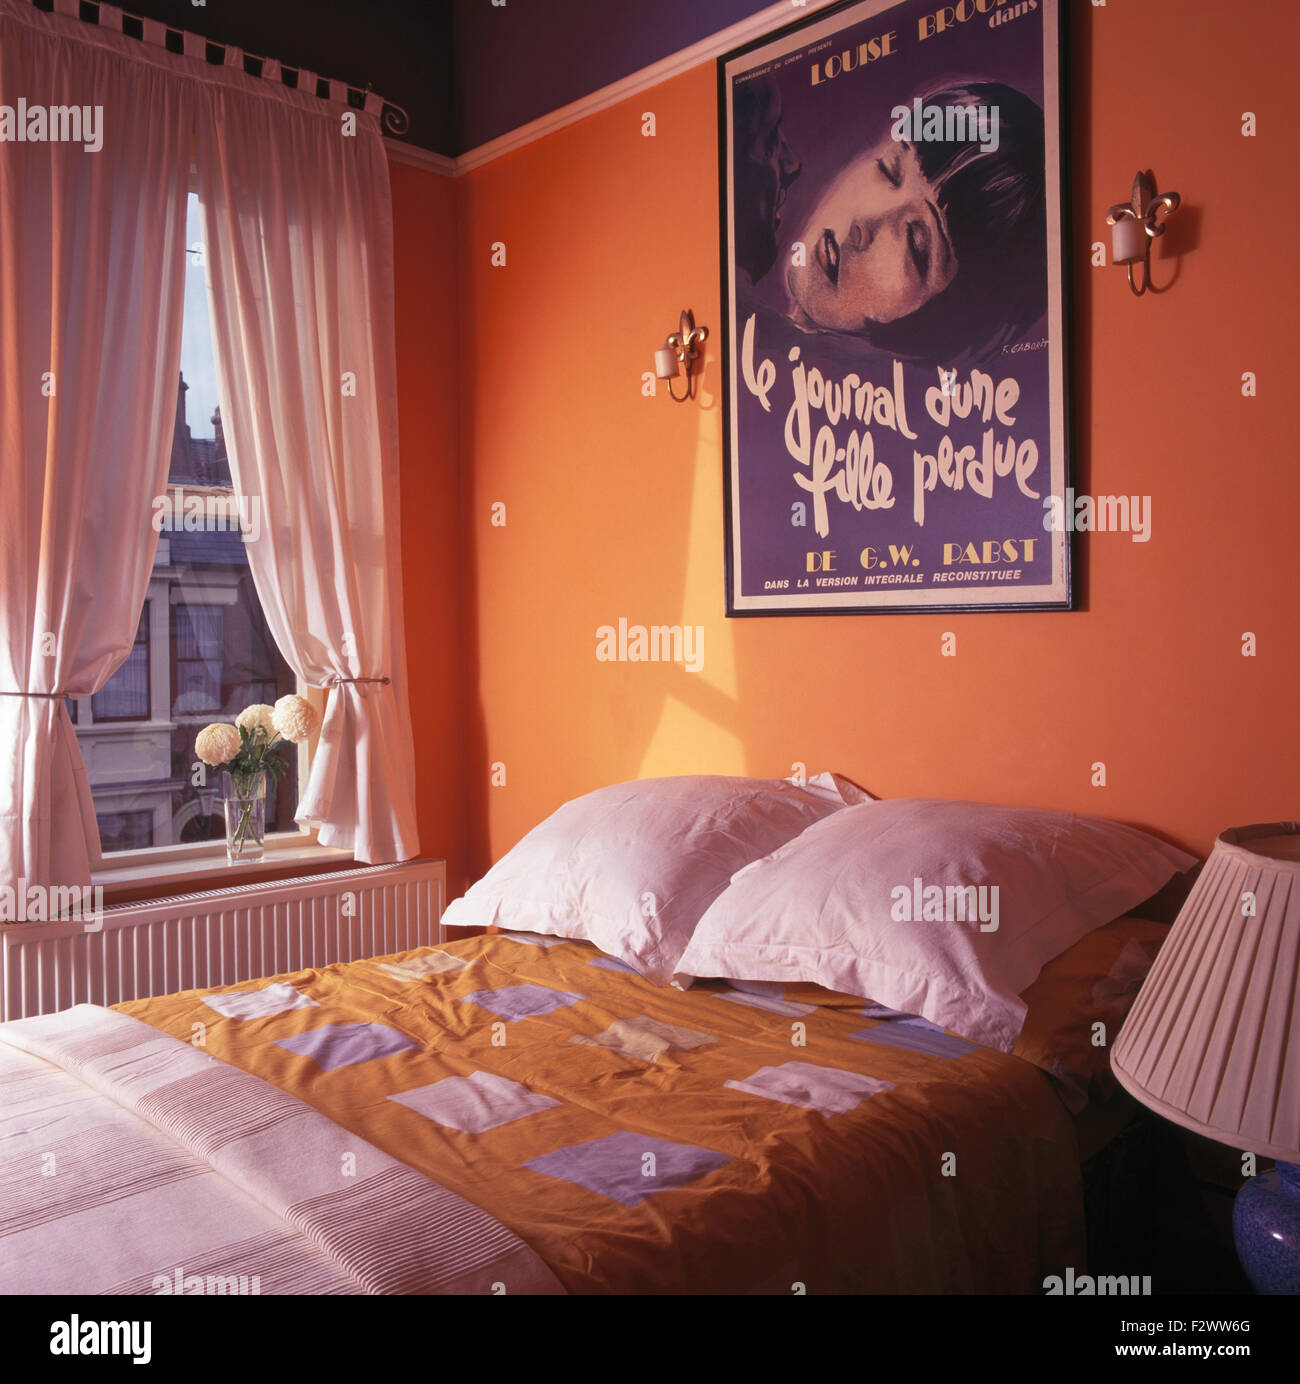 French film poster above bed in orange nineties bedroom with white drapes on the window Stock Photo